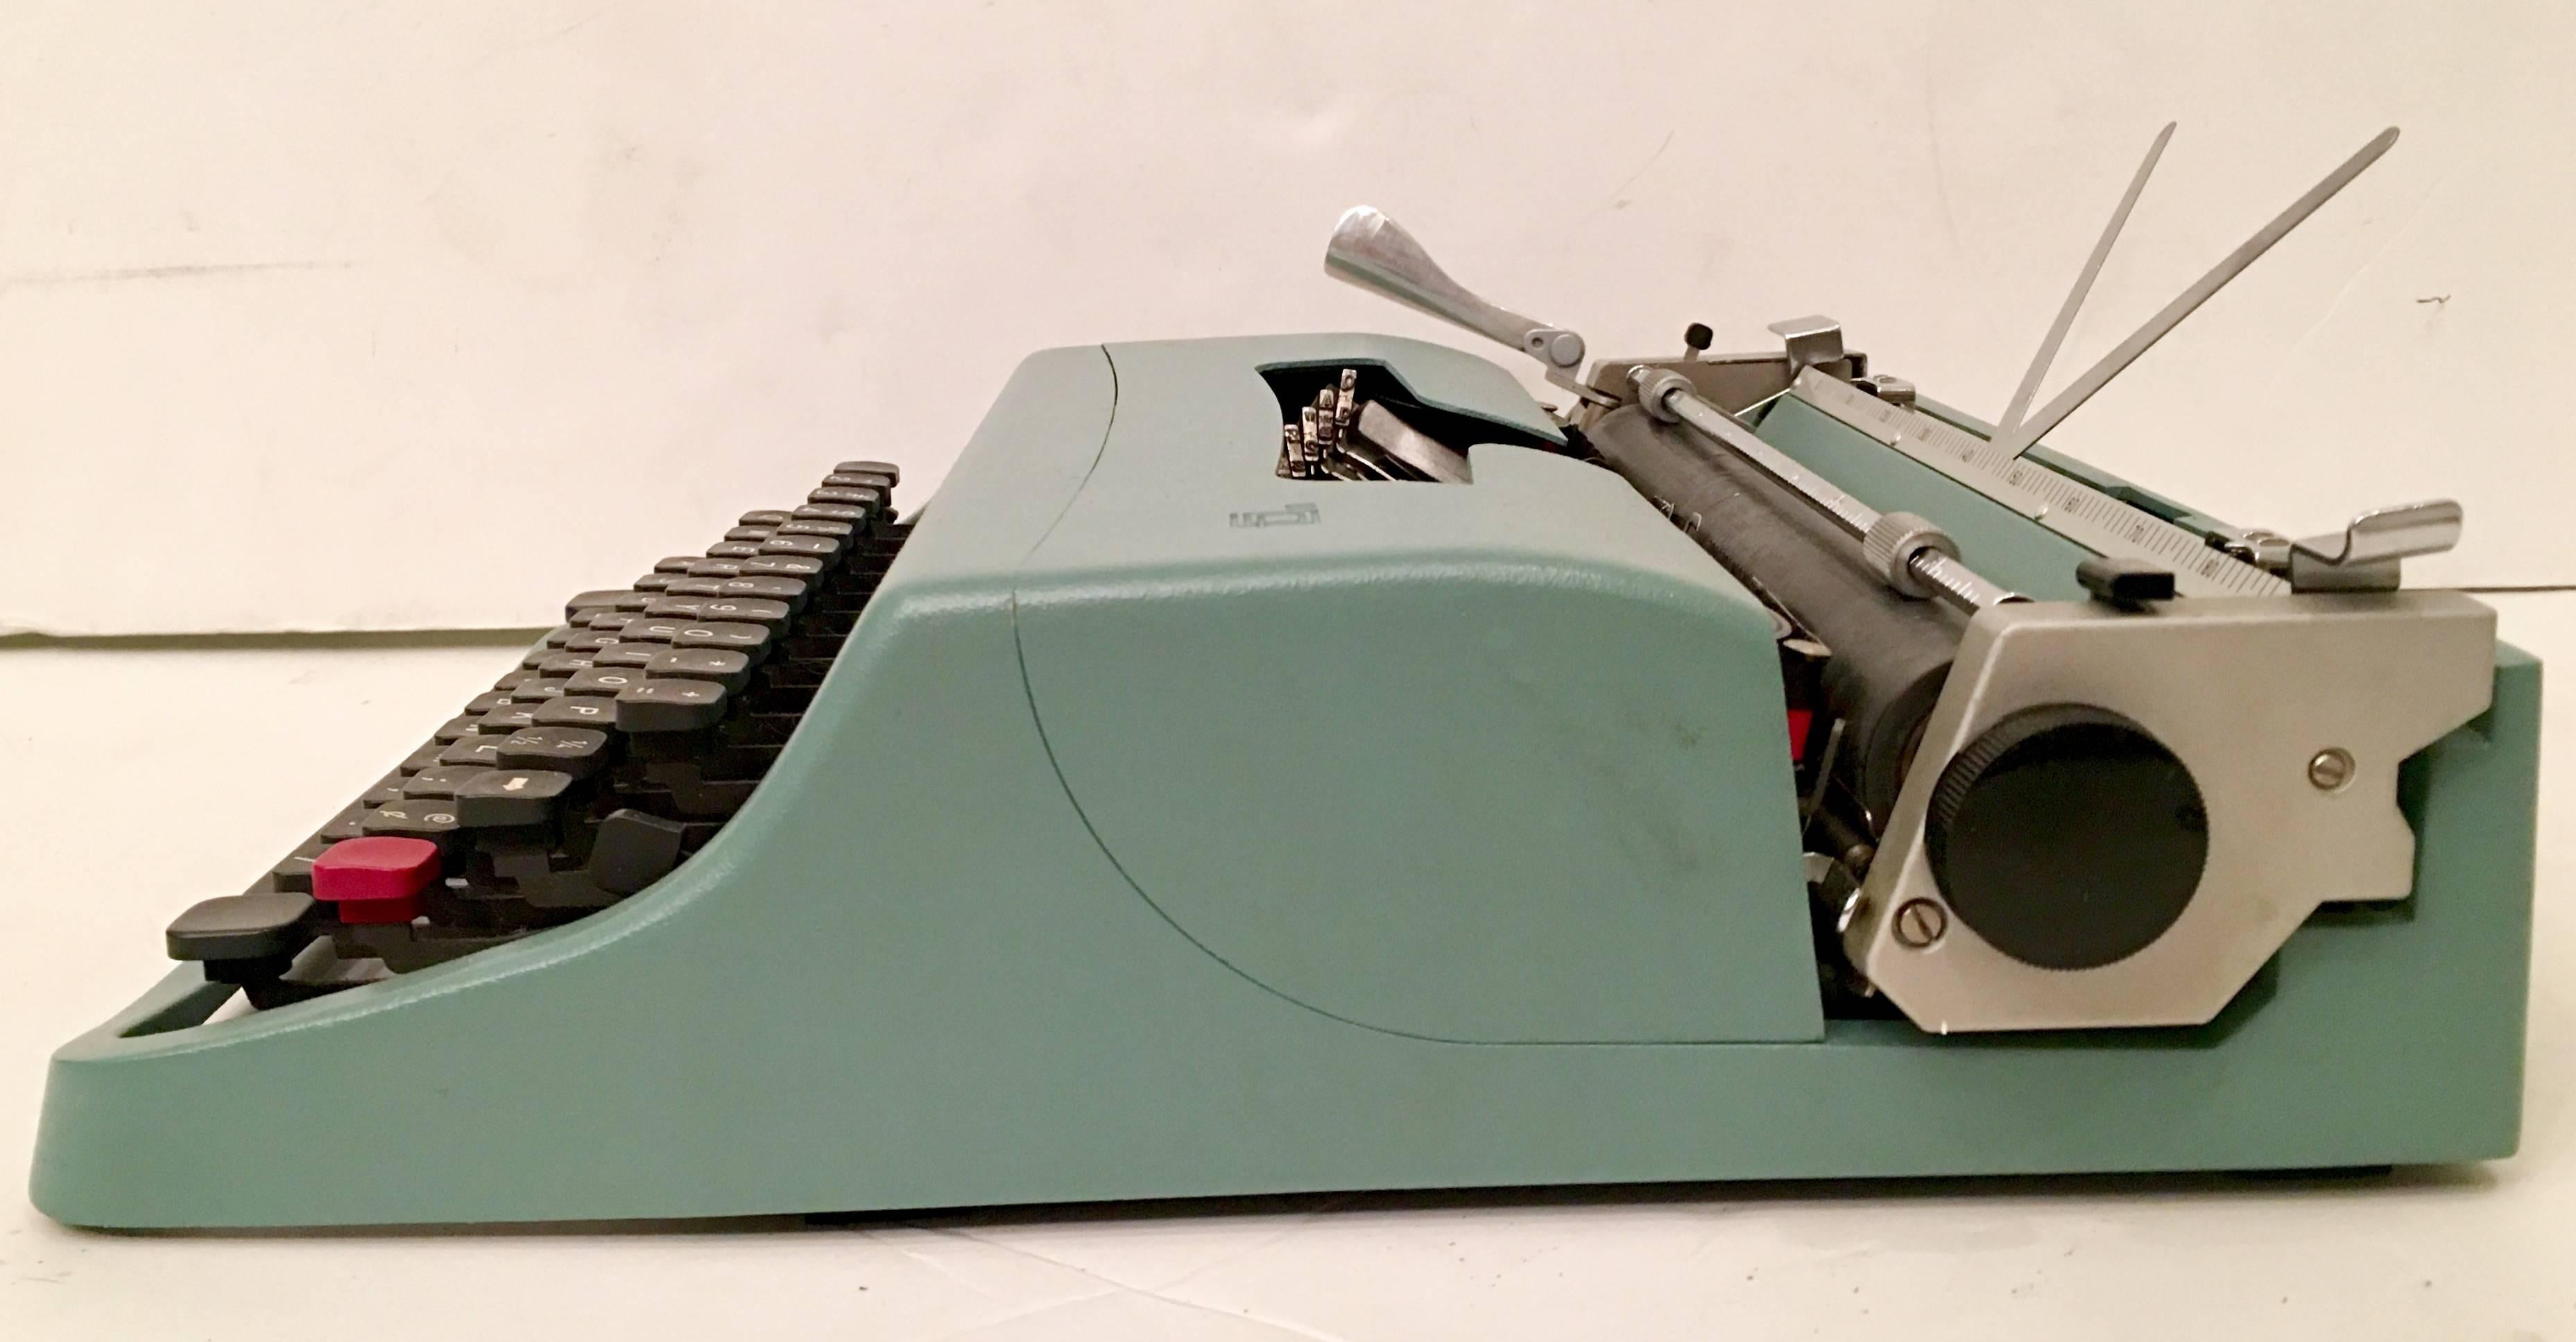 Fantastic 1960'S Olivetti Underwood "Lettera 32" green and chrome typewriter with original racing stripe case, two manuals and vinyl protective interior case. In working order and includes installed ribbon and excellent condition.
      